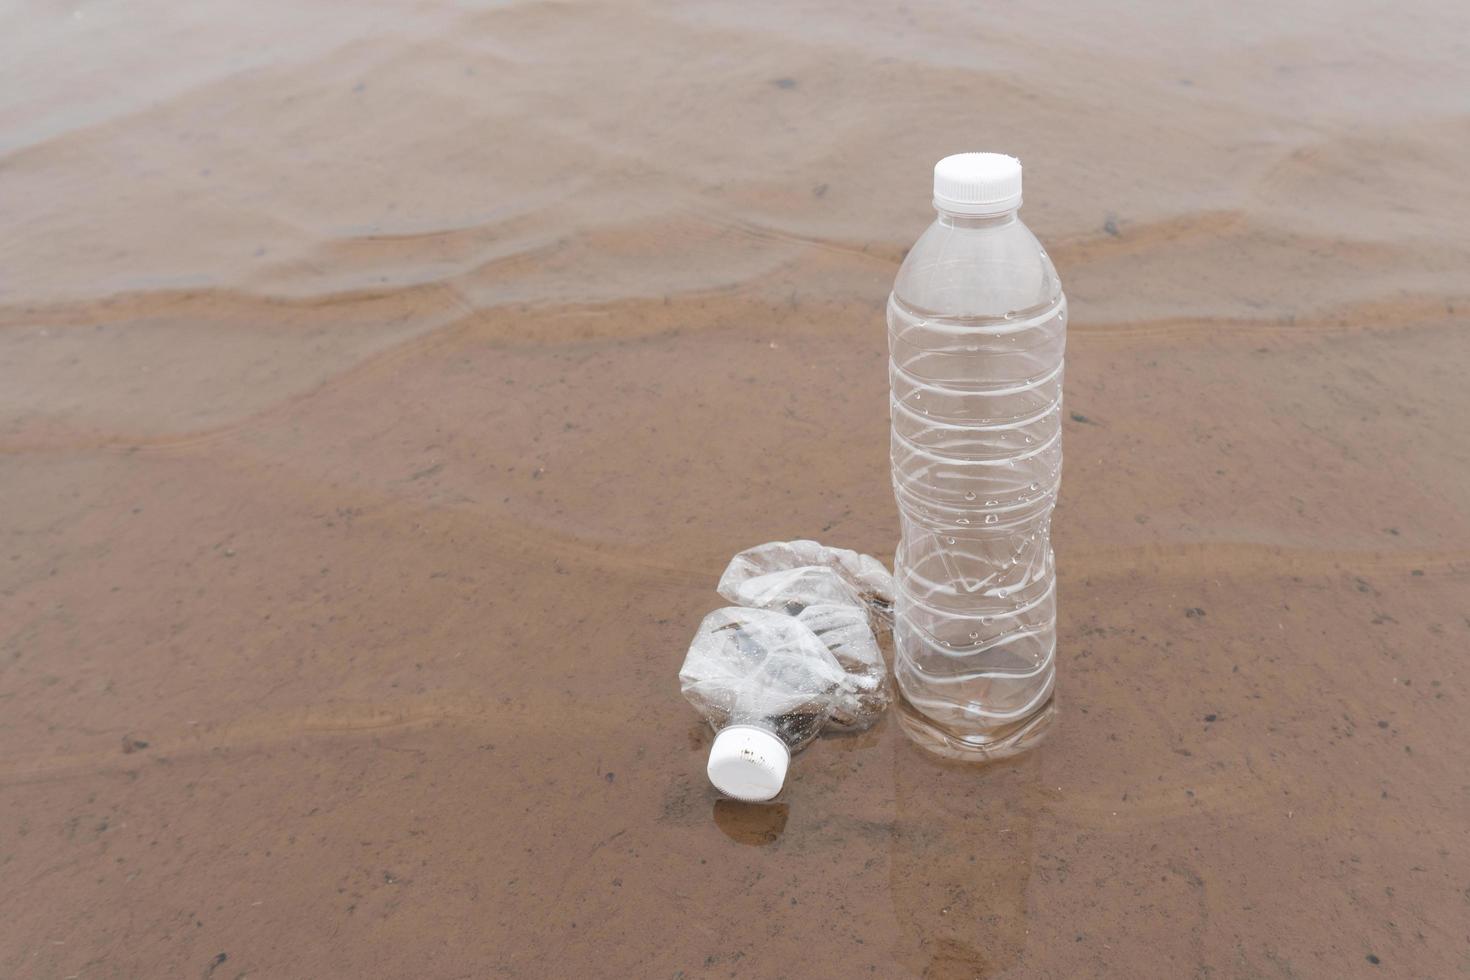 Plastic water bottles pollution in the ocean Environment concept photo